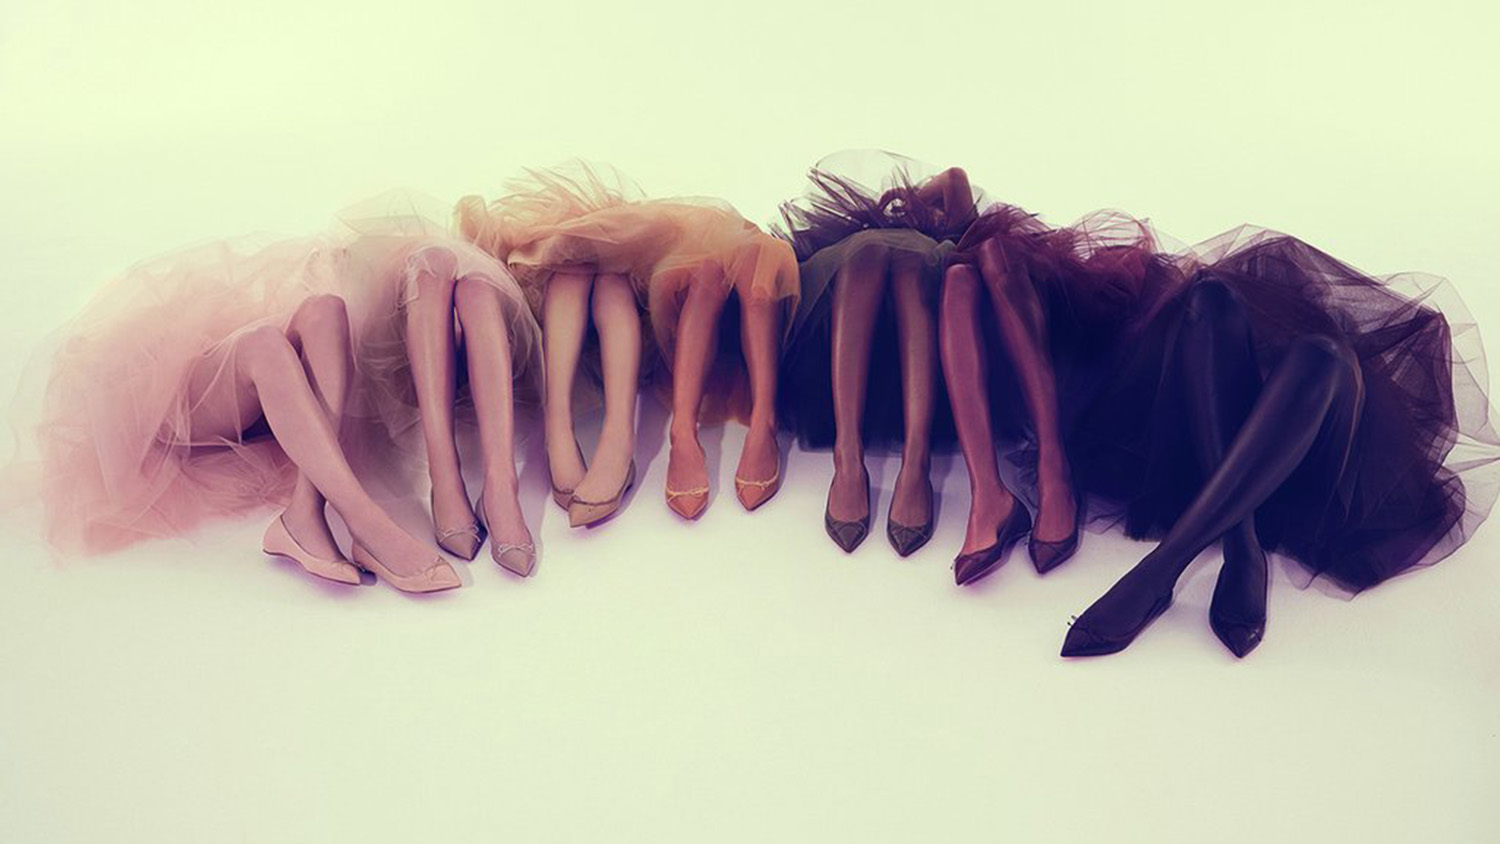 Christian Louboutin nude shoes for 'every woman' | CNN